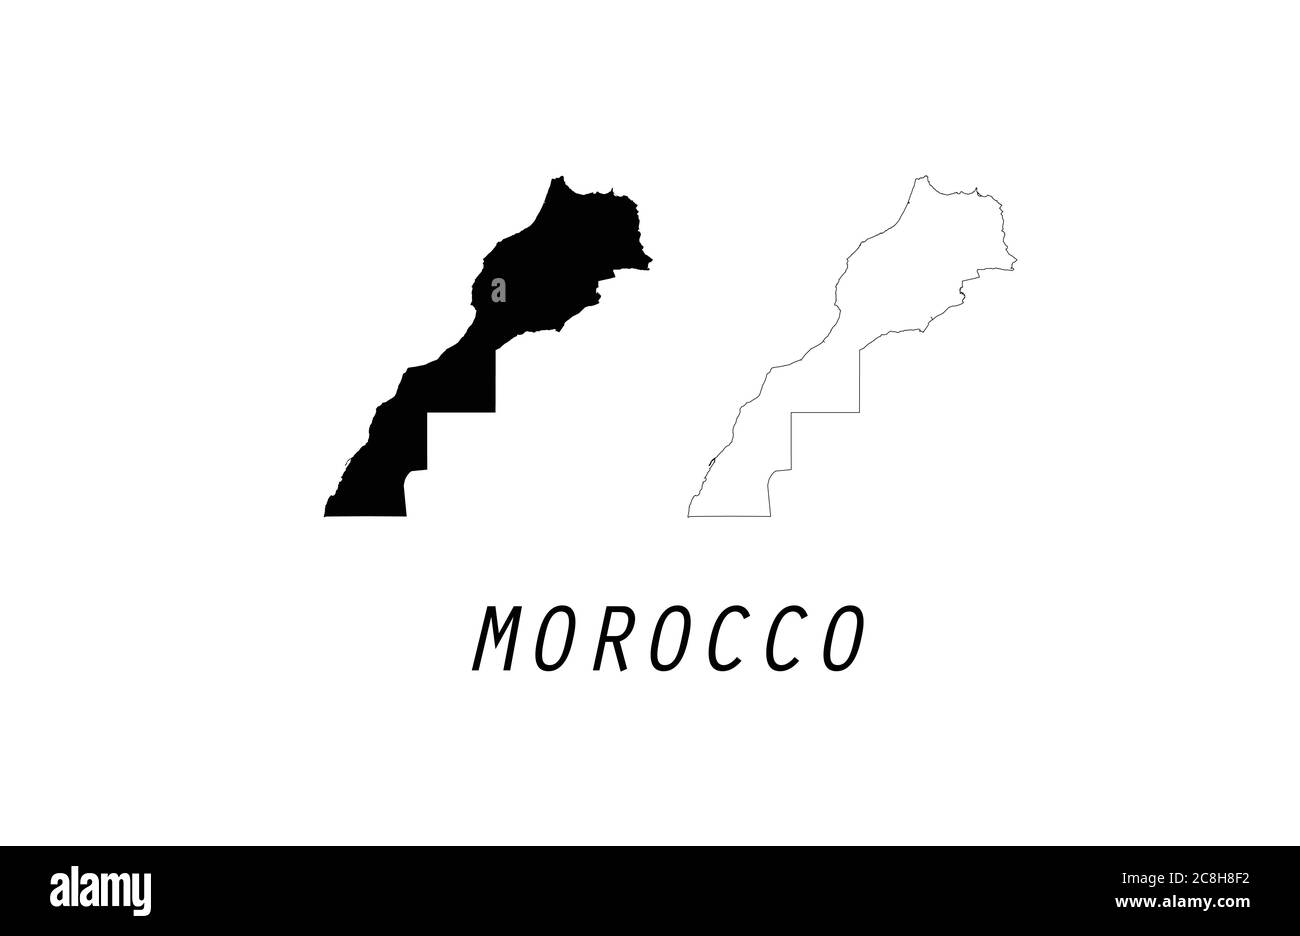 Morocco map outline vector illustration Stock Vector